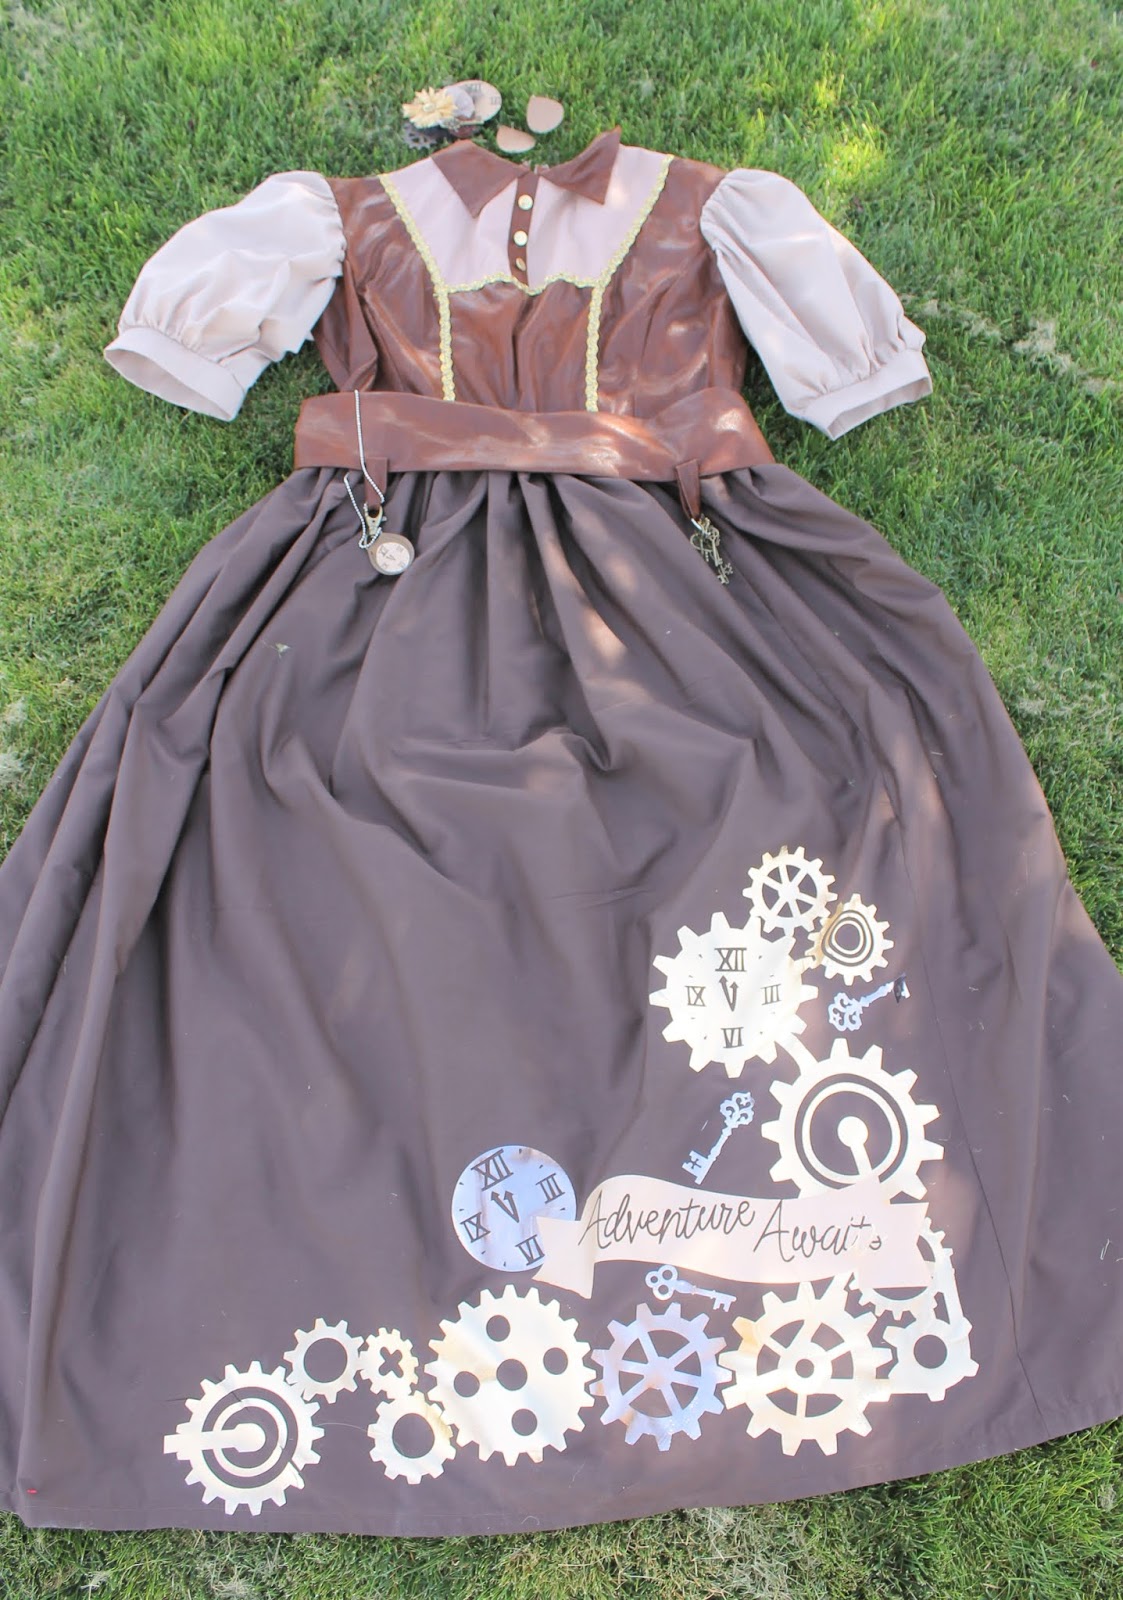 DIY Steampunk Costumes for the Family | Sew Simple Home